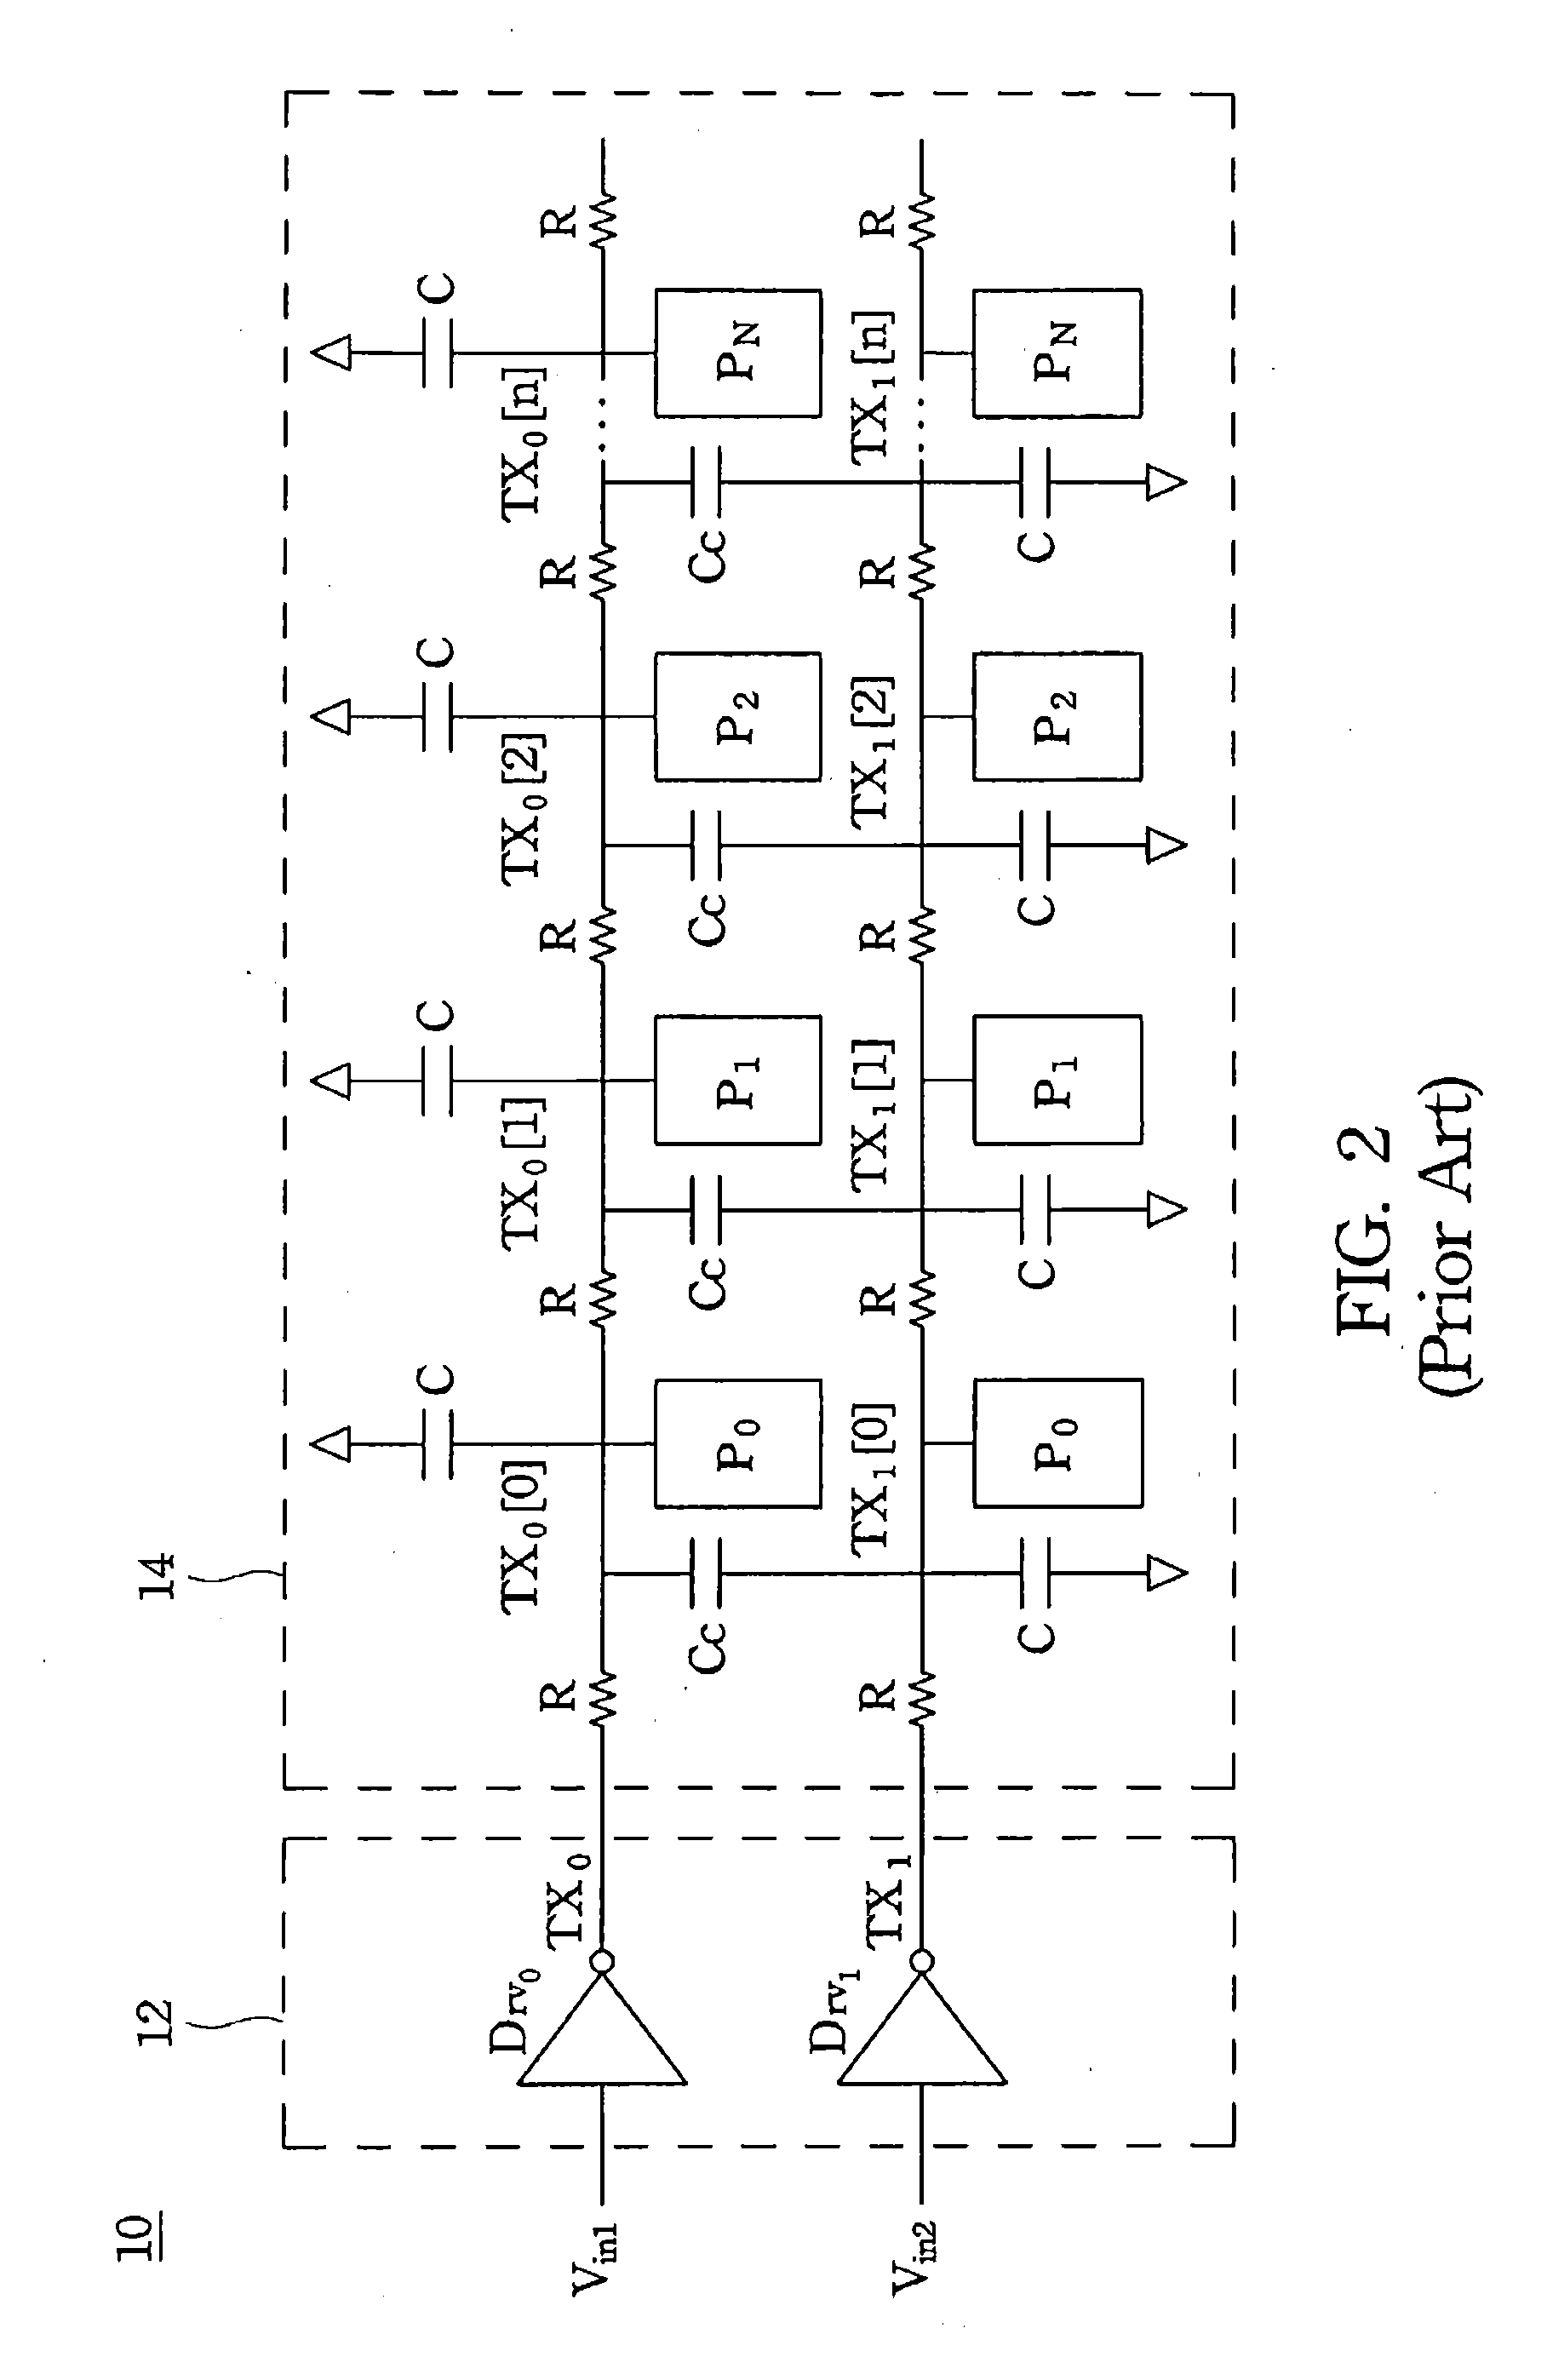 CMOS sensor with low partition noise and low disturbance between adjacent row control signals in a pixel array